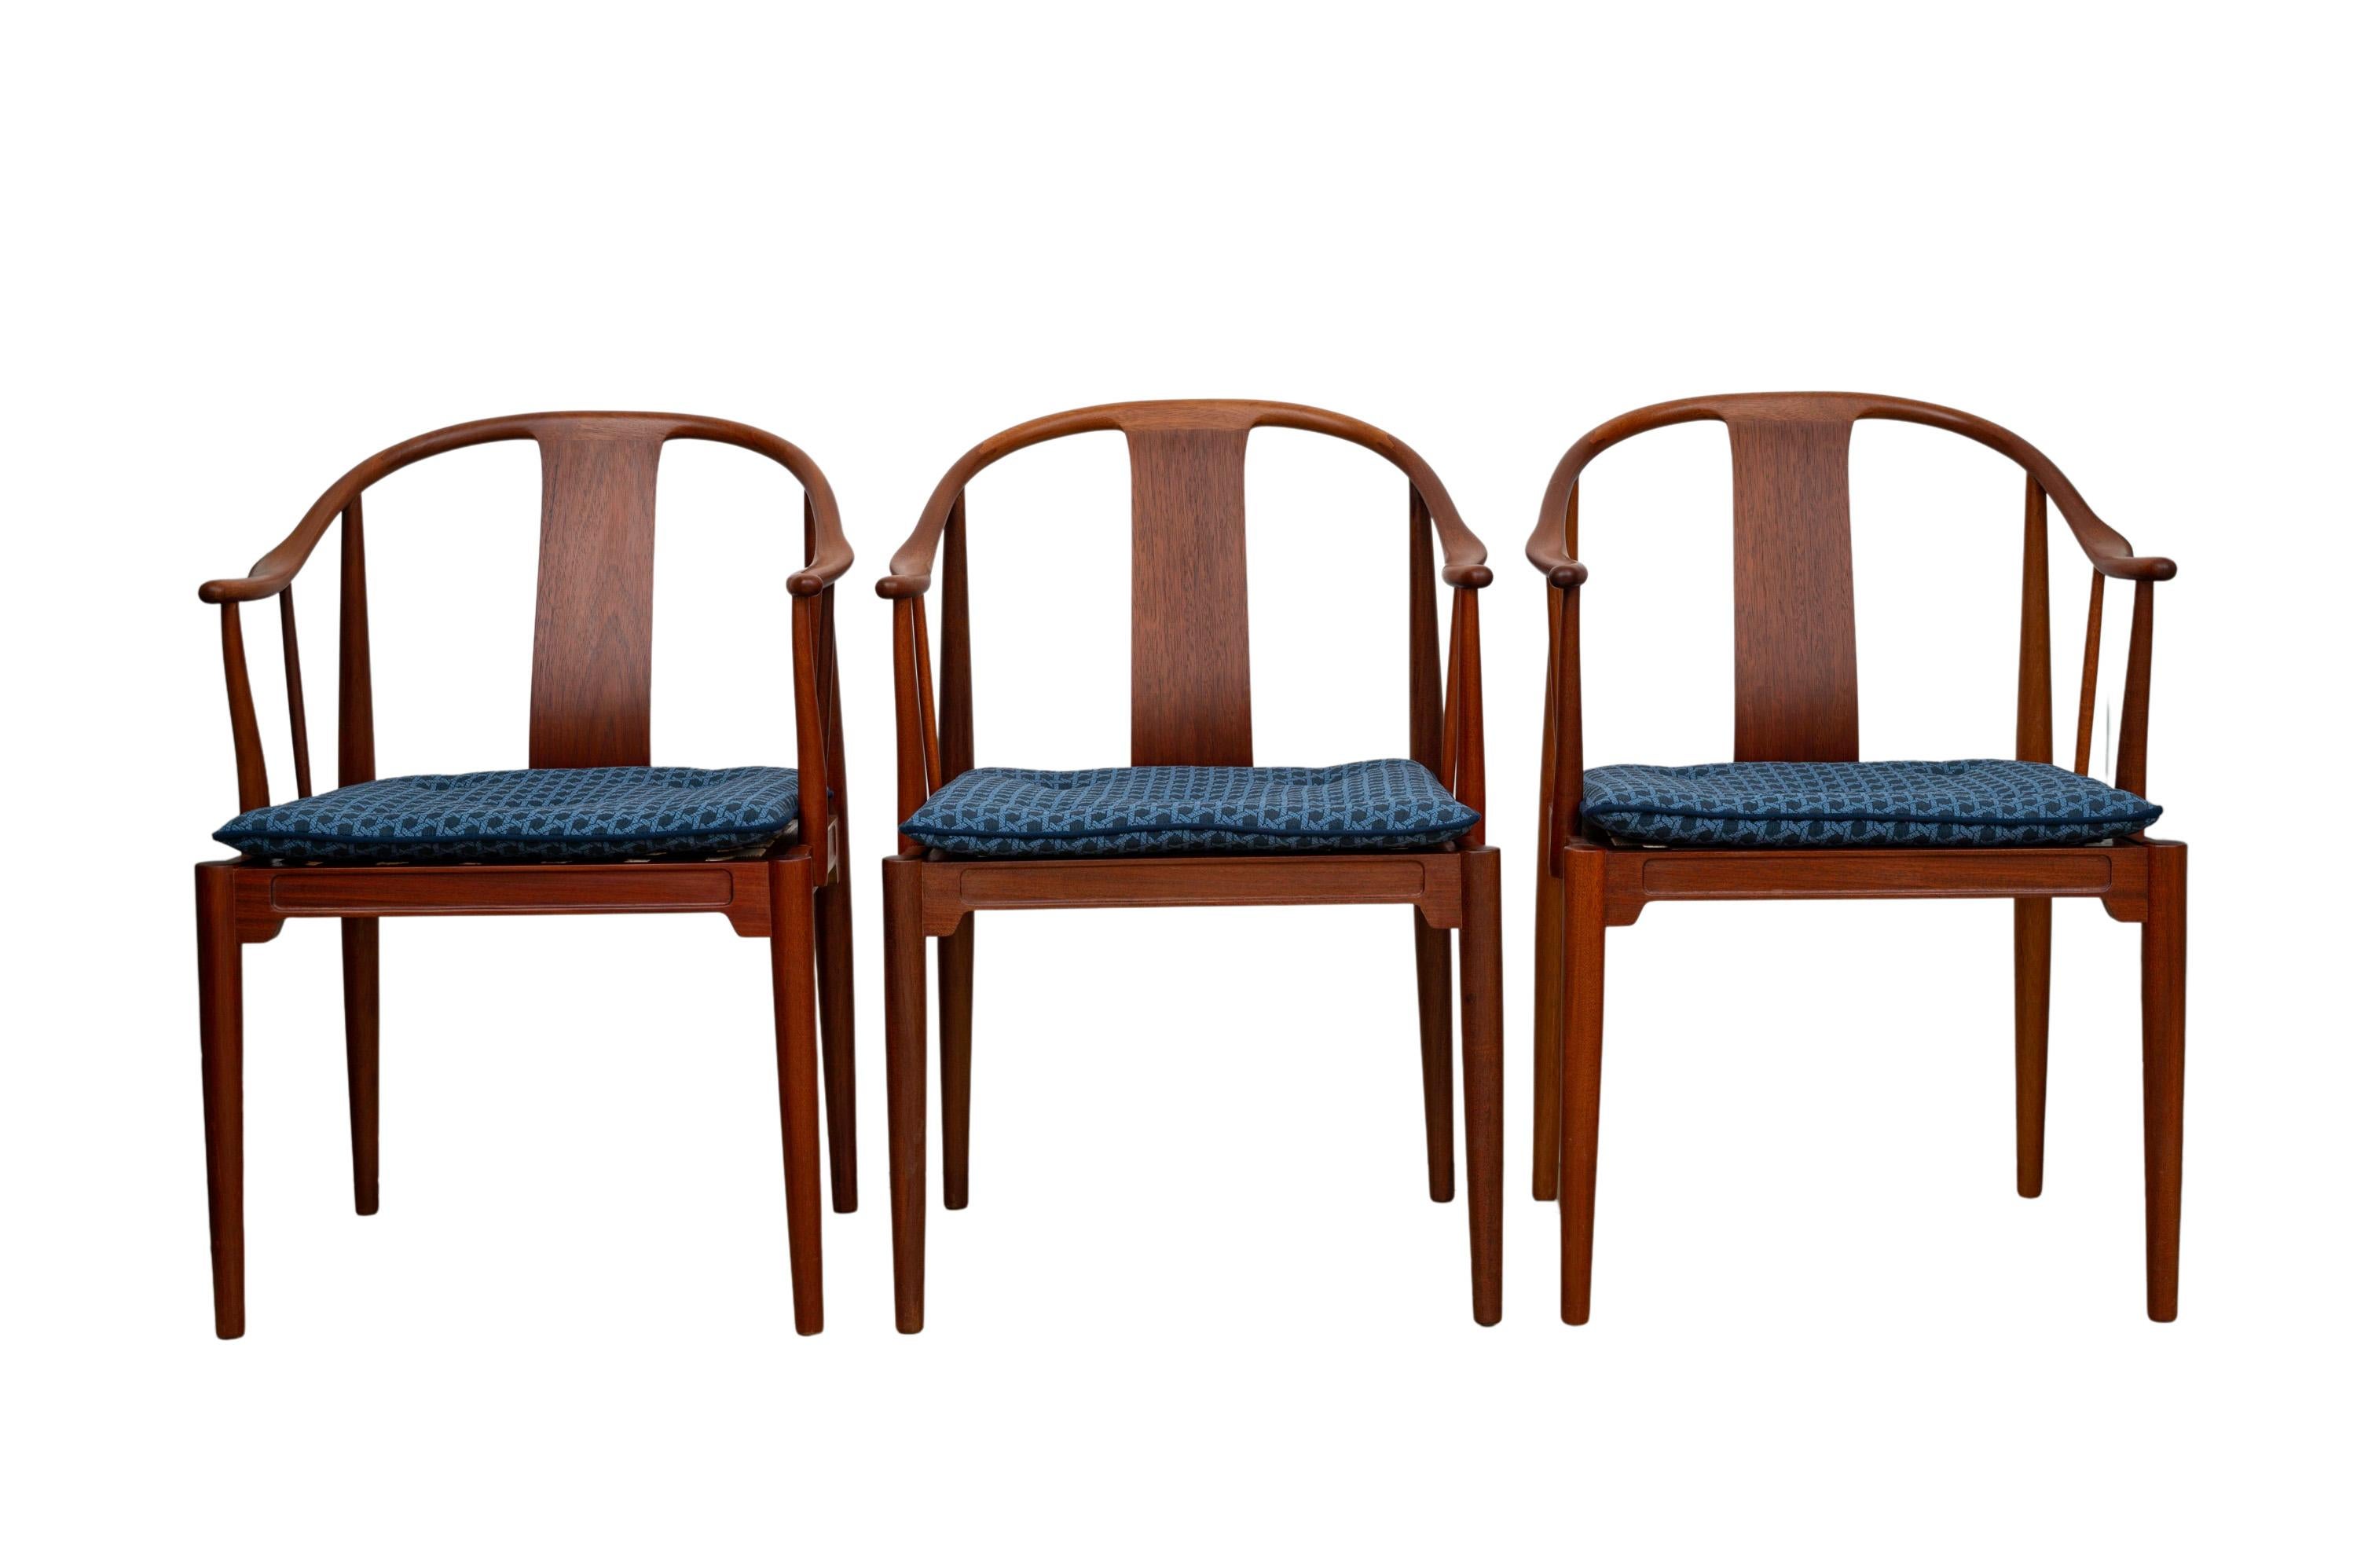 3 China chairs, designed by Hans J. Wegner, executed by Fritz Hansen, 1981, mahogany, cushions reupholstered

The 